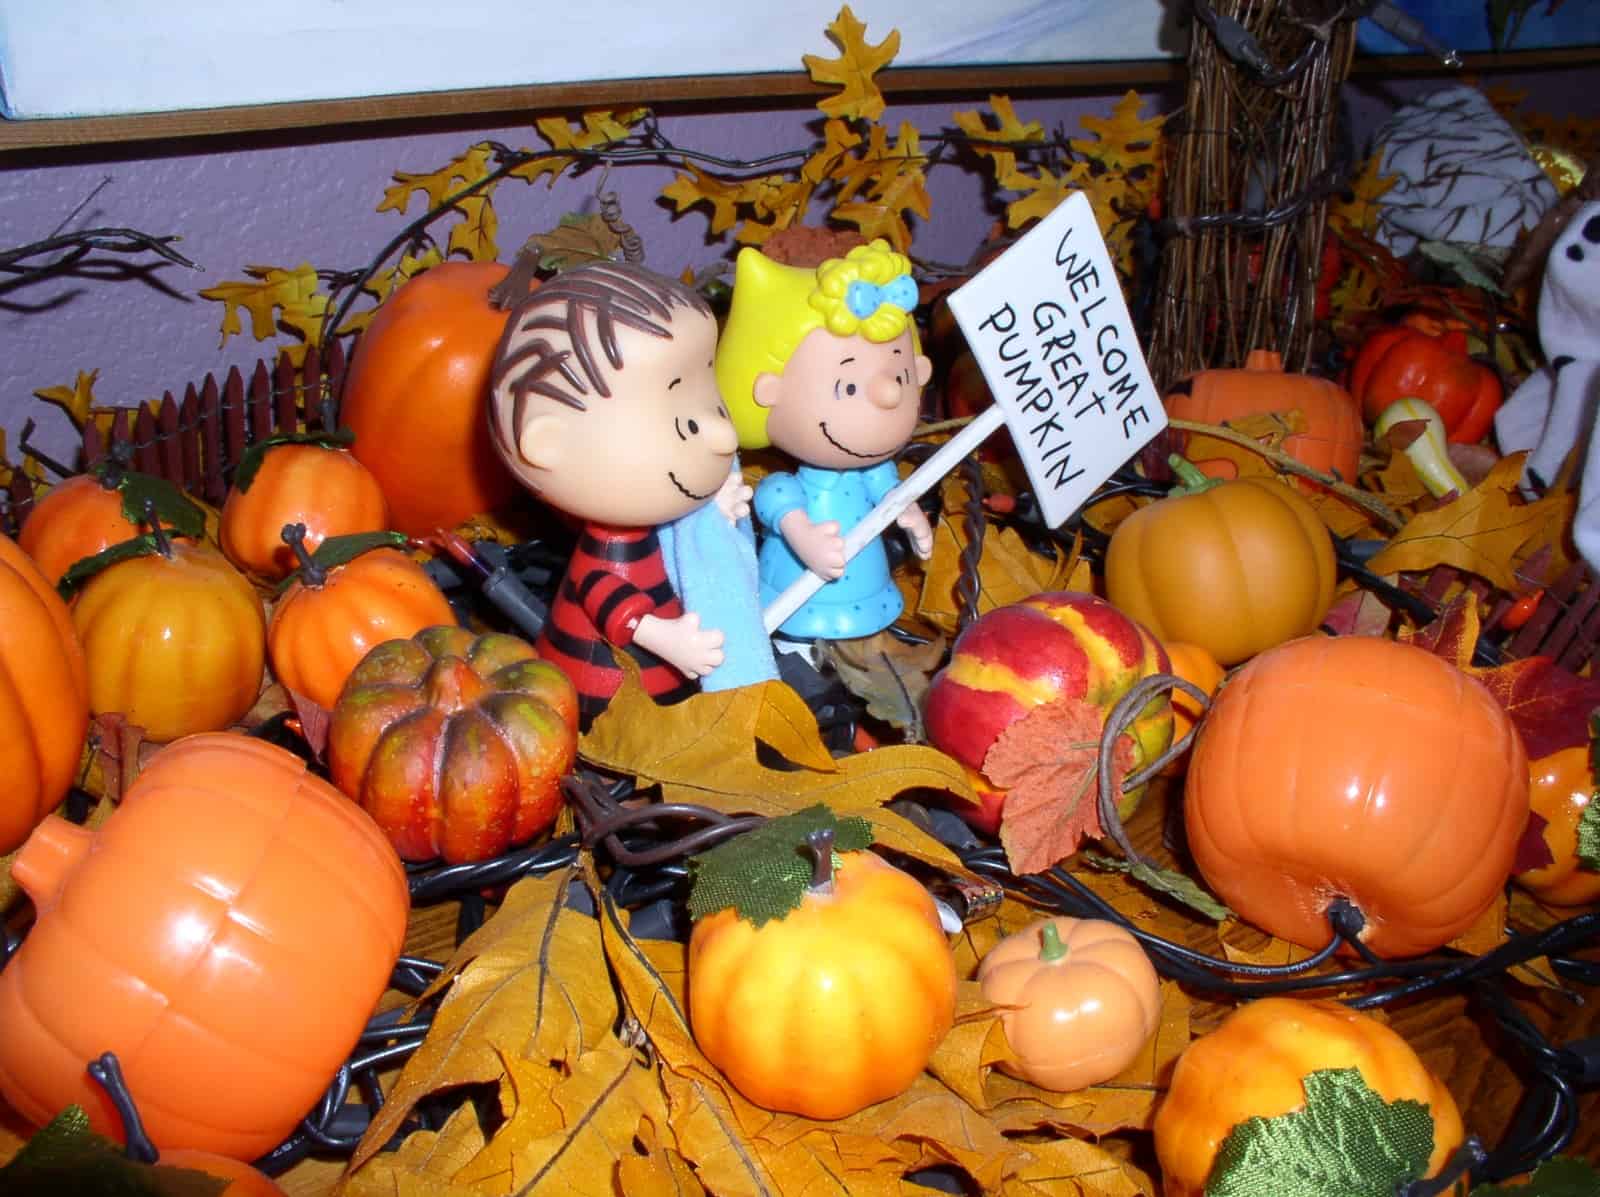 Charlie Brown Pumpkin Patch by Kevin Dooley on Wikicommons.